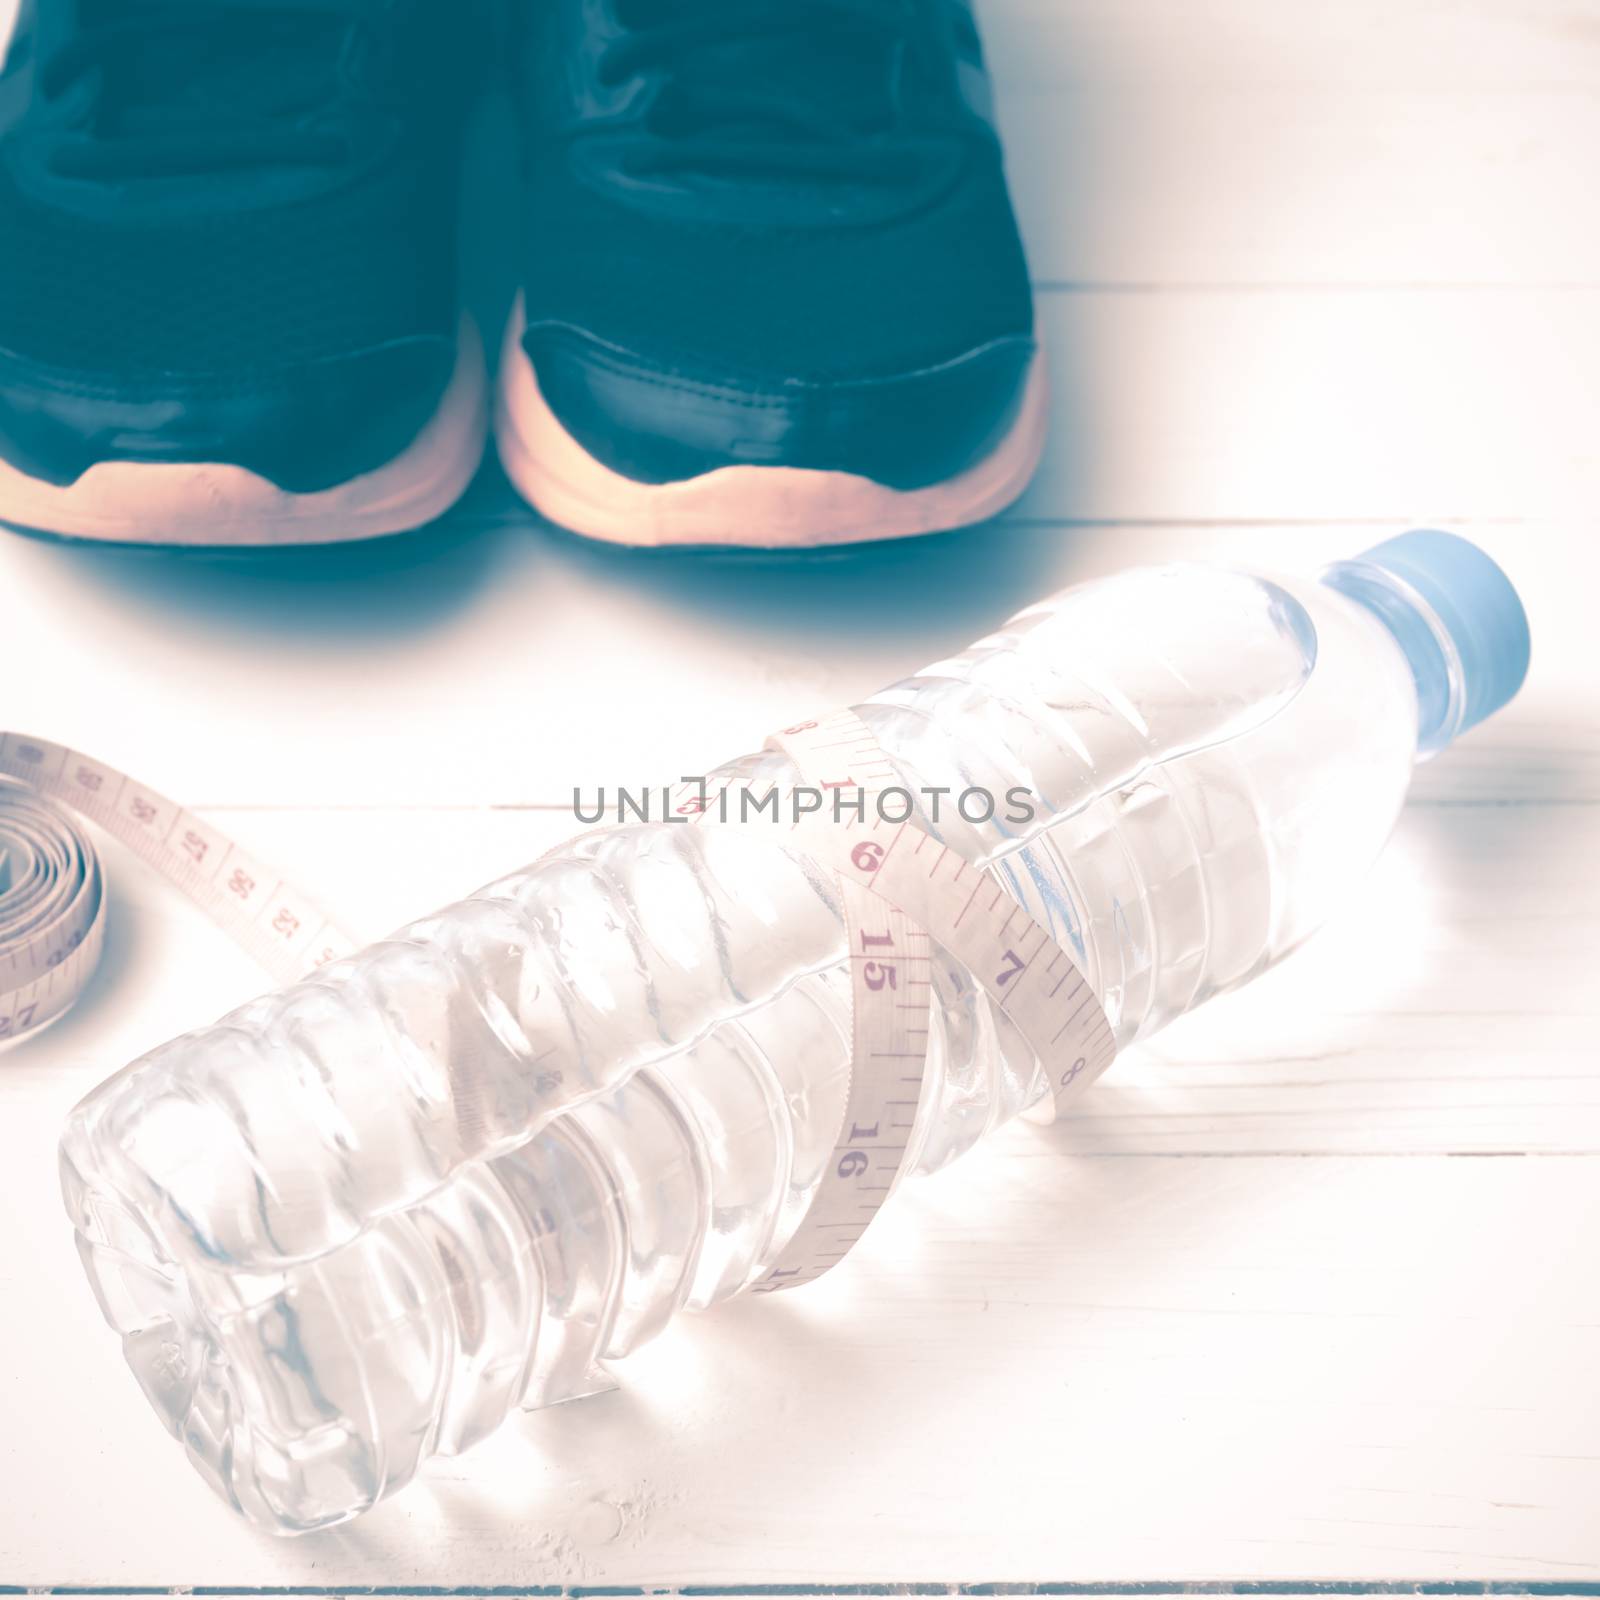 fitness equipment : running shoes,drinking water and measuring tape on white wood table vintage style